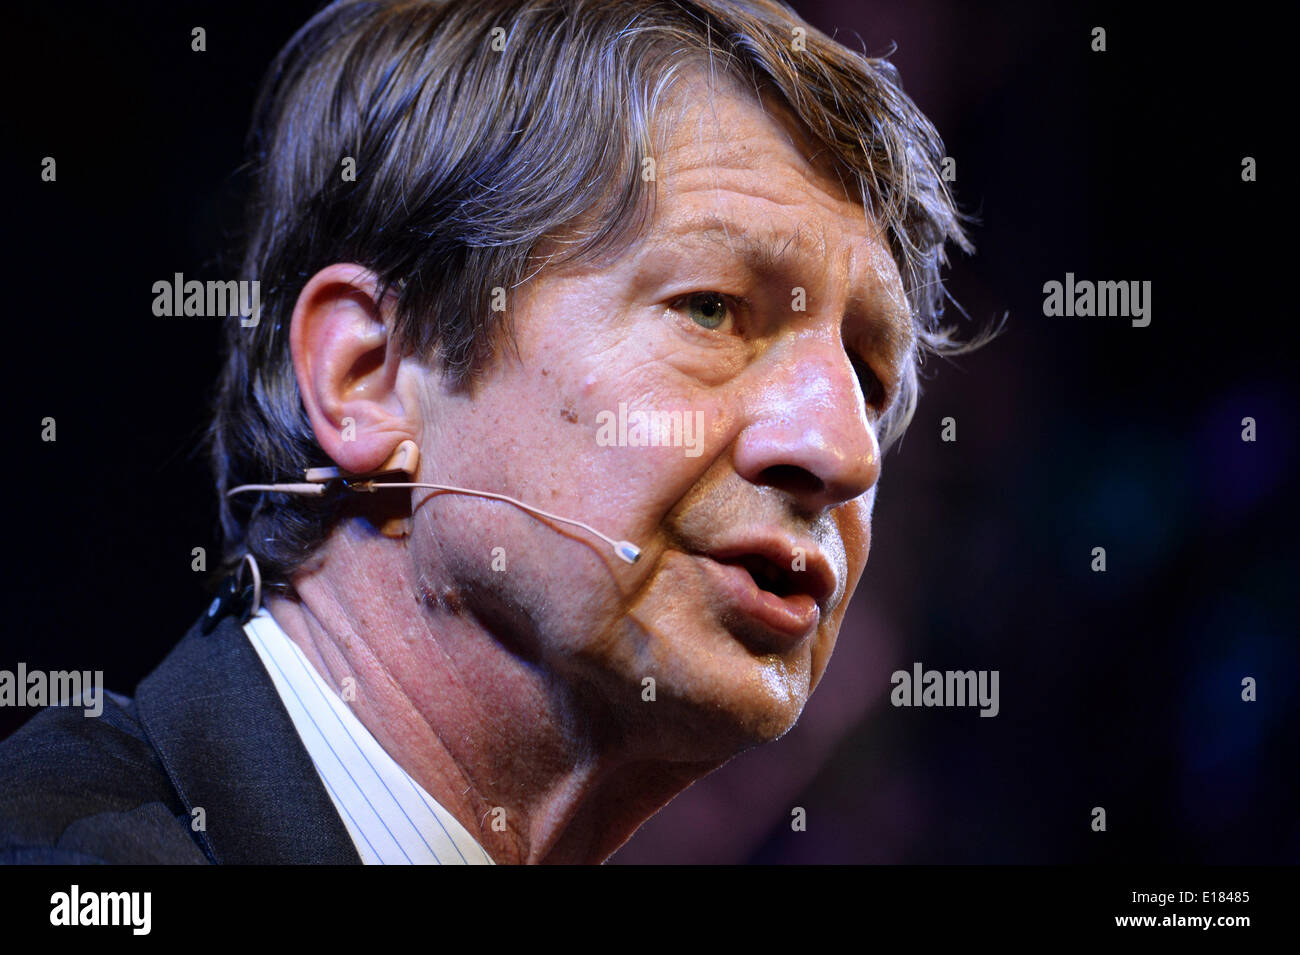 Hay on Wye, Wales UK, BANK HOLIDAY MONDAY 26 May 2014 American satirist PJ O'Rourke speaking on the fifth day of the 2014 Daily Telegraph Hay Literature Festival, Wales UK photo Credit: keith morris/Alamy Live News Stock Photo